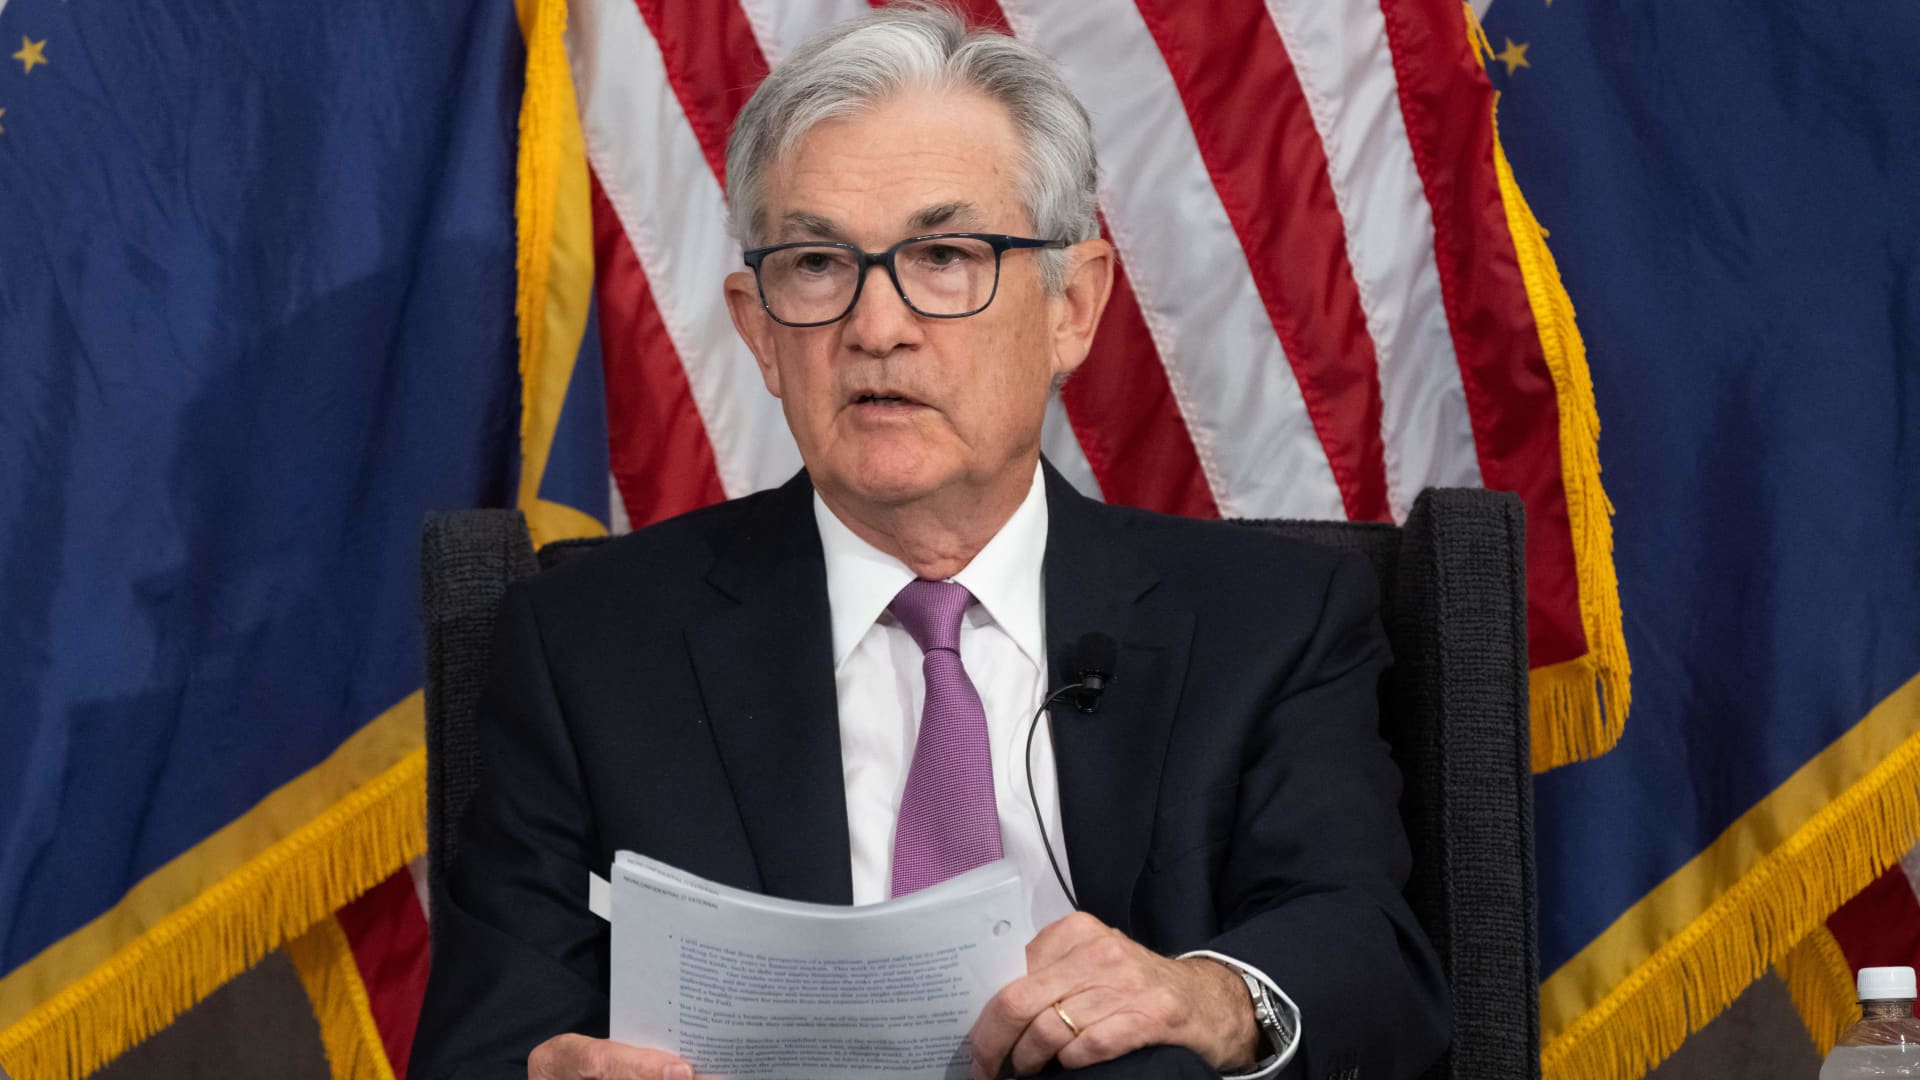 Fed Chair Powell says rates may not have to rise as much as expected to curb inflation